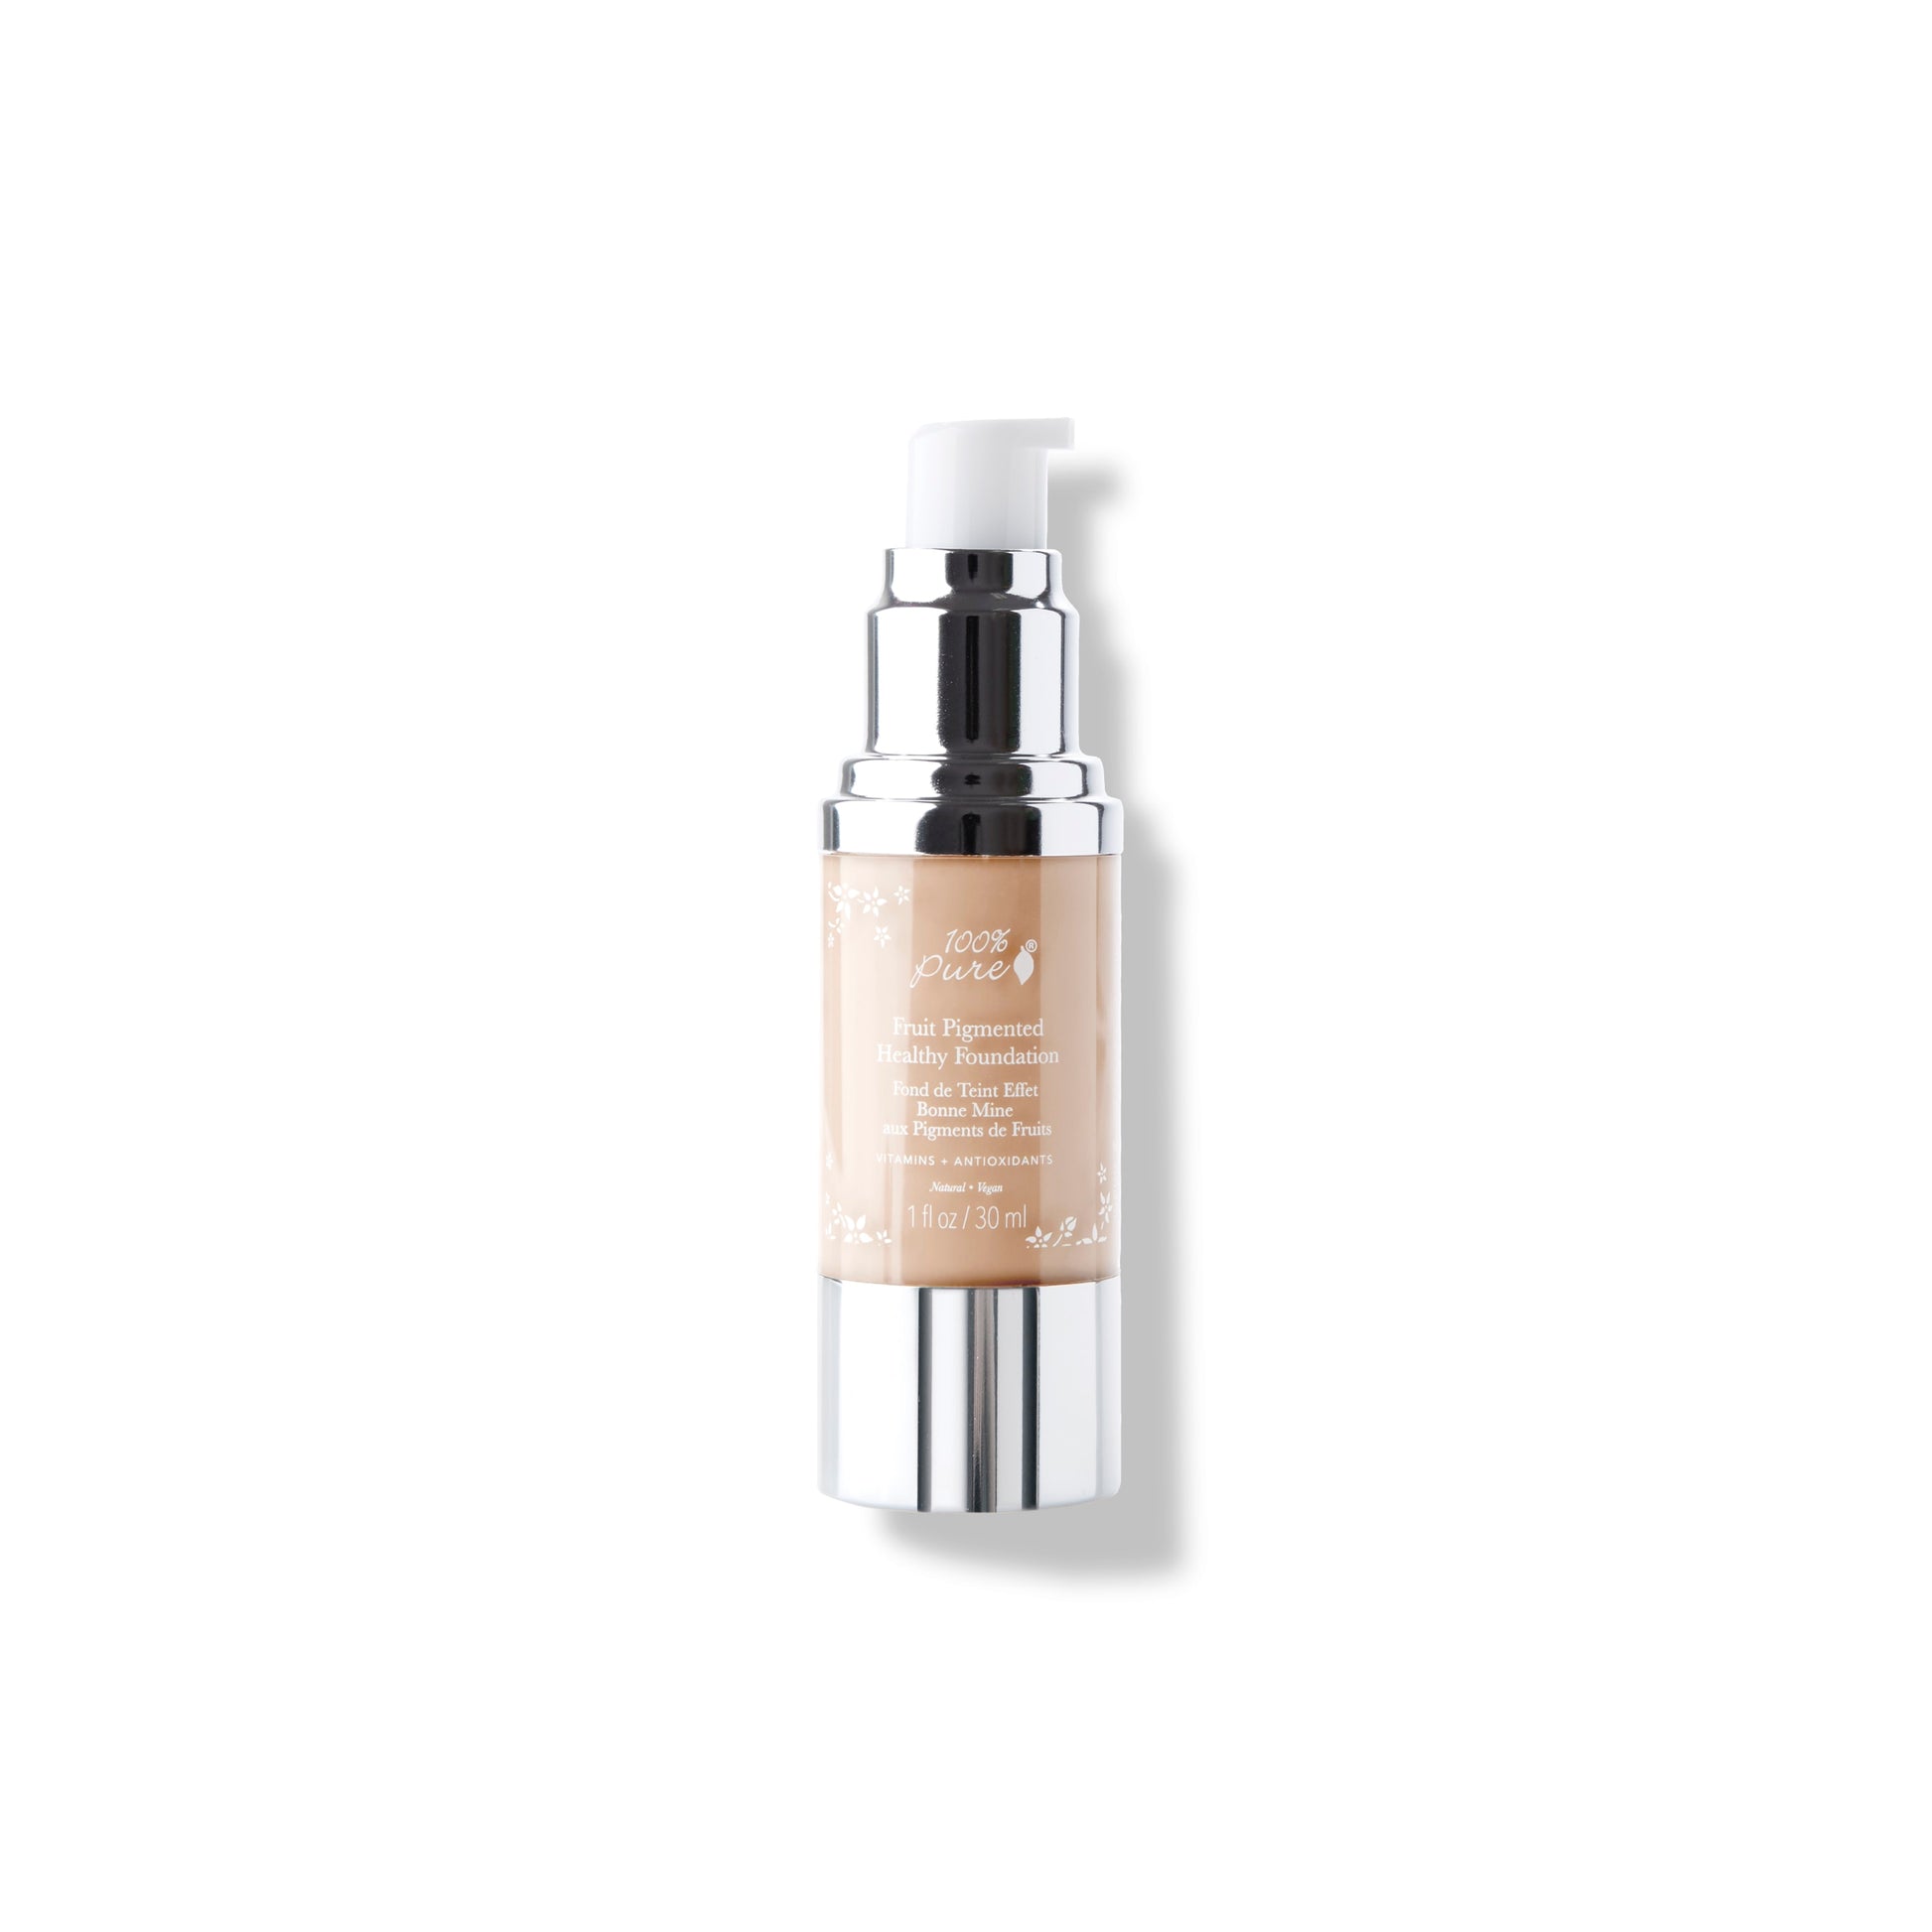 100% PURE Fruit Pigmented Healthy Foundation white peach